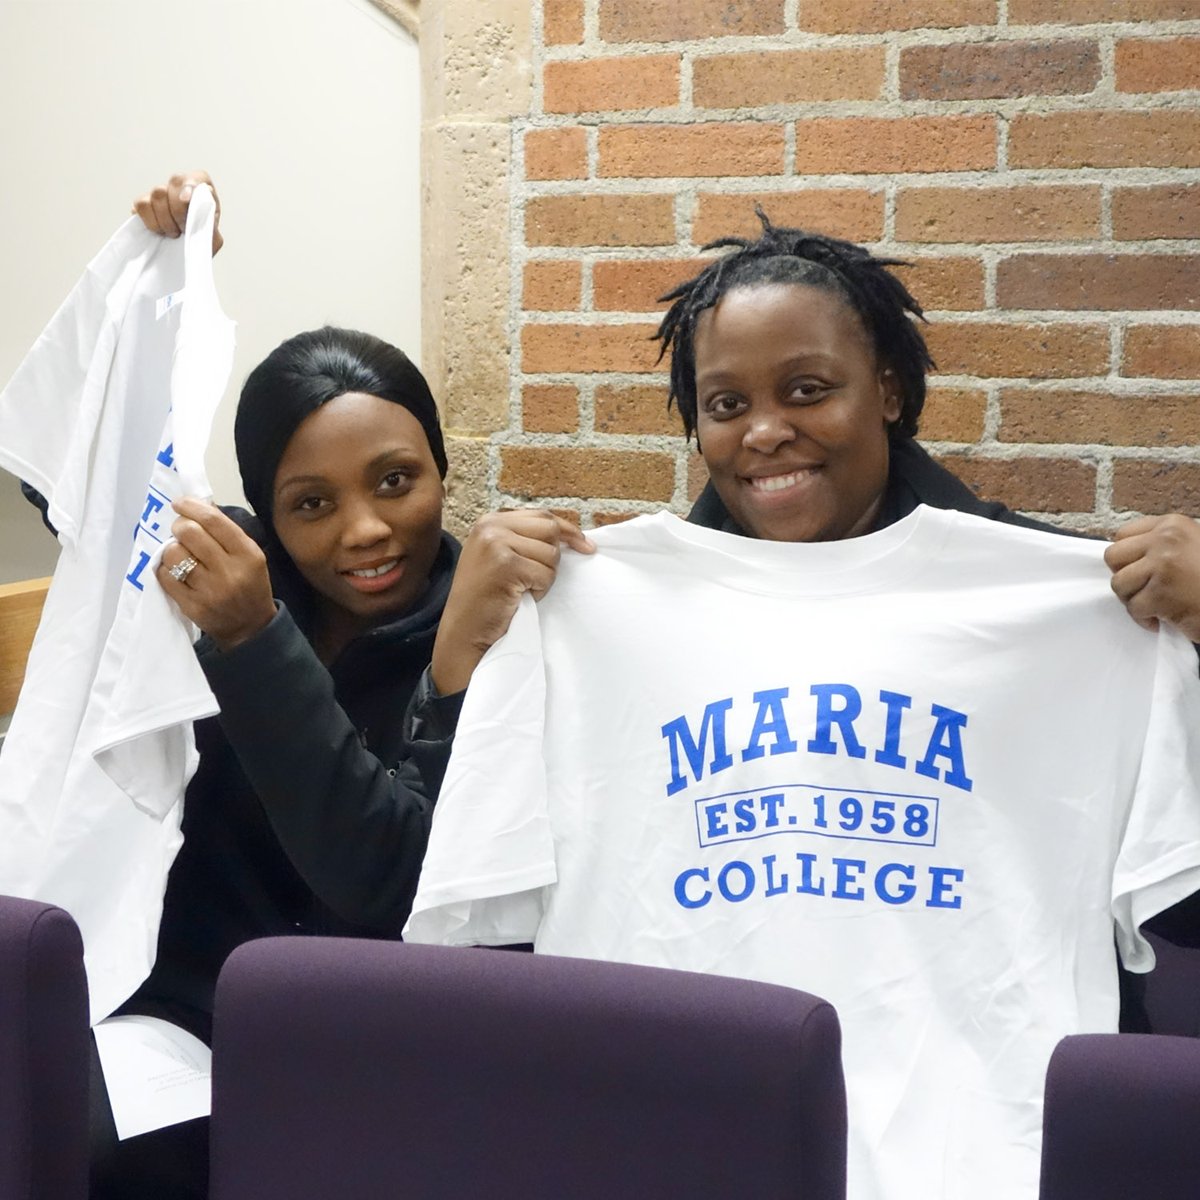 Show off your Maria College pride! Check out the Campus Store on the lower level of Main for all your merch needs. Not on campus? Visit the store online at bit.ly/42RVSr1/.